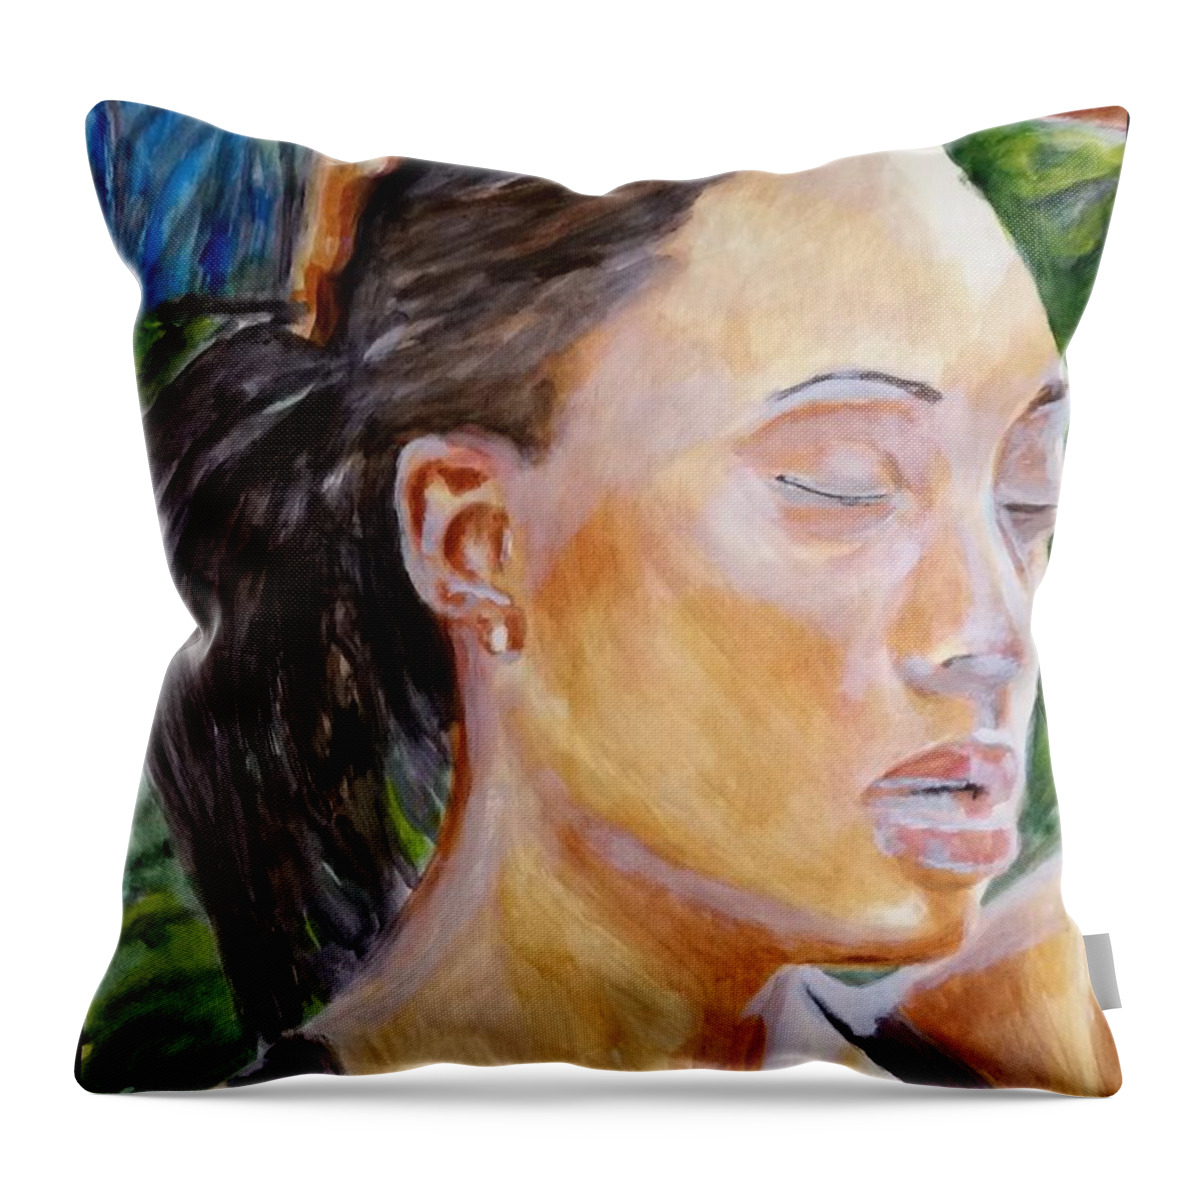 Runner Throw Pillow featuring the painting workout III feeling by Bachmors Artist